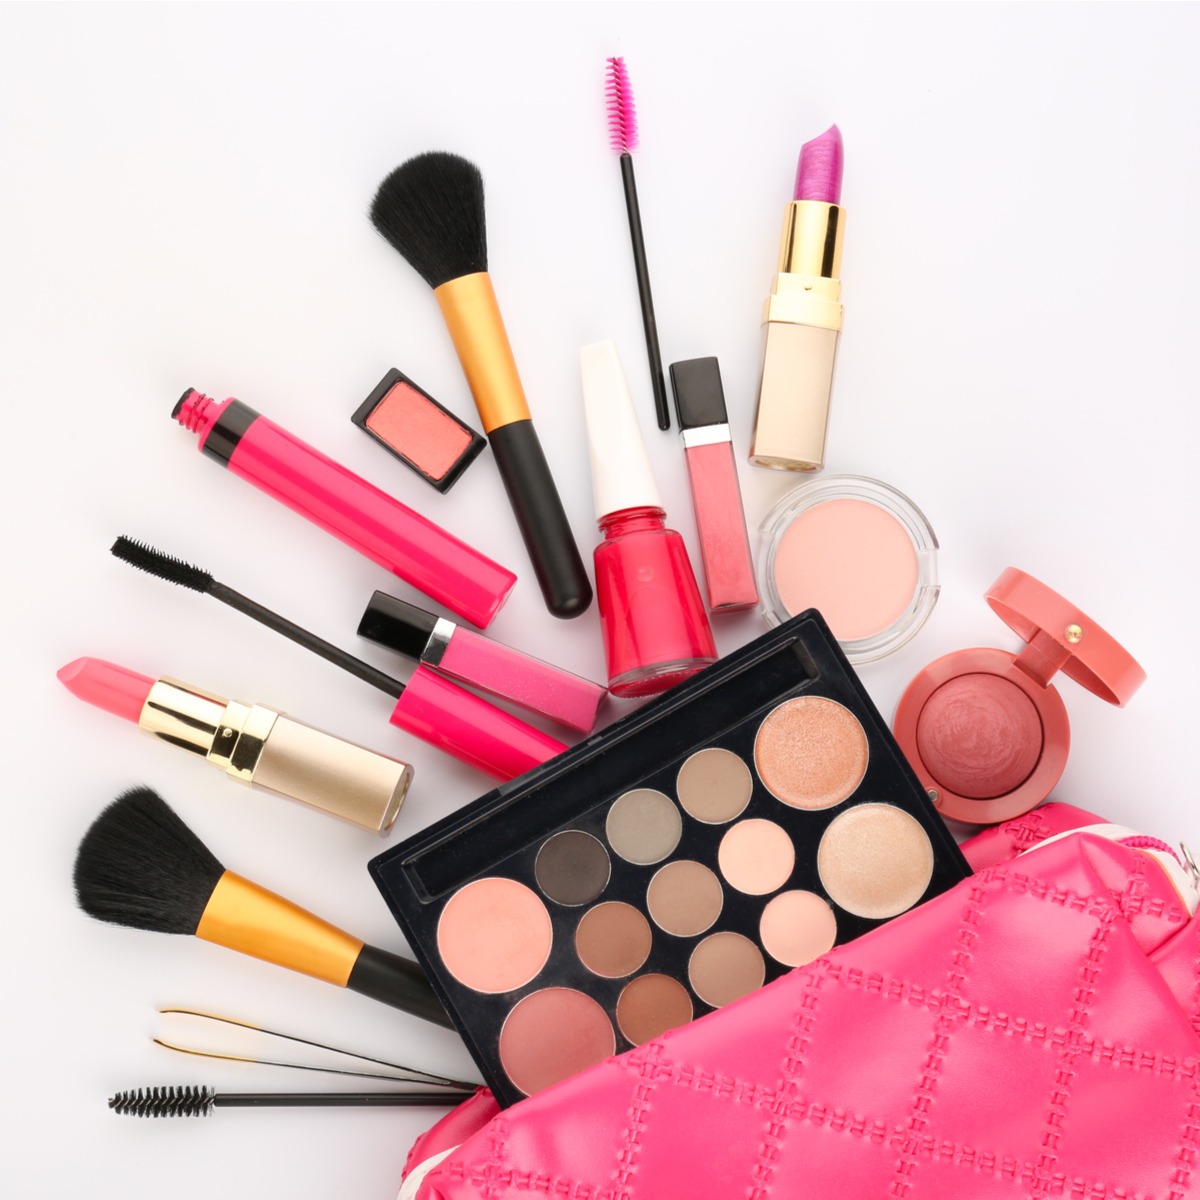 Why Your Makeup is Pilling and How to Prevent It